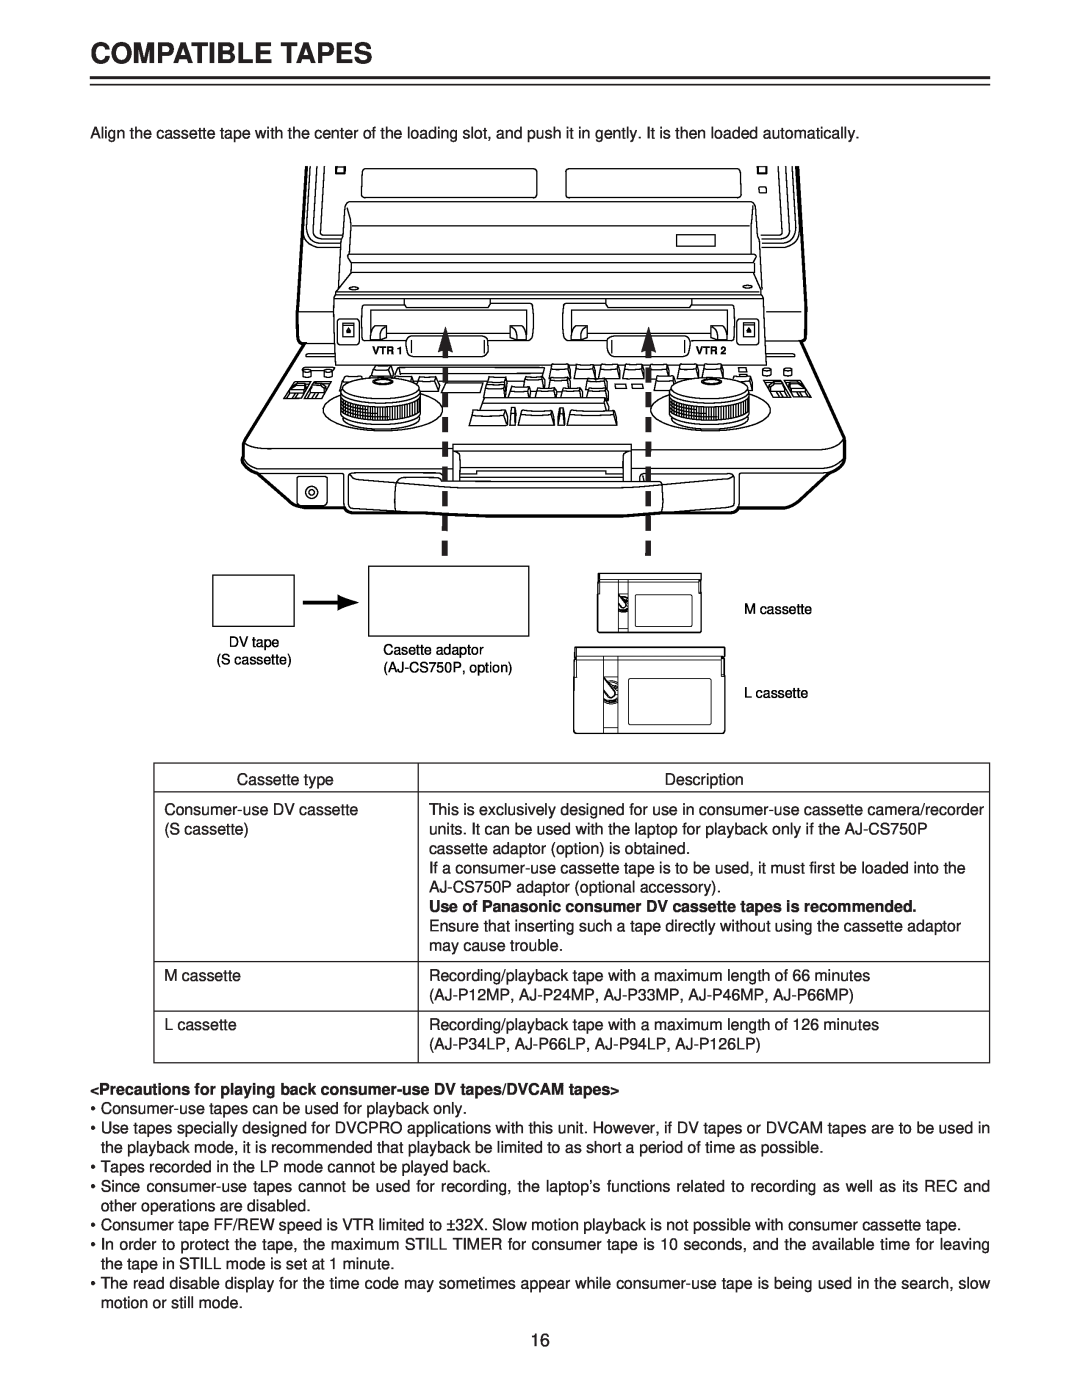 Panasonic AJ-LT85P manual Compatible Tapes, Use of Panasonic consumer DV cassette tapes is recommended 